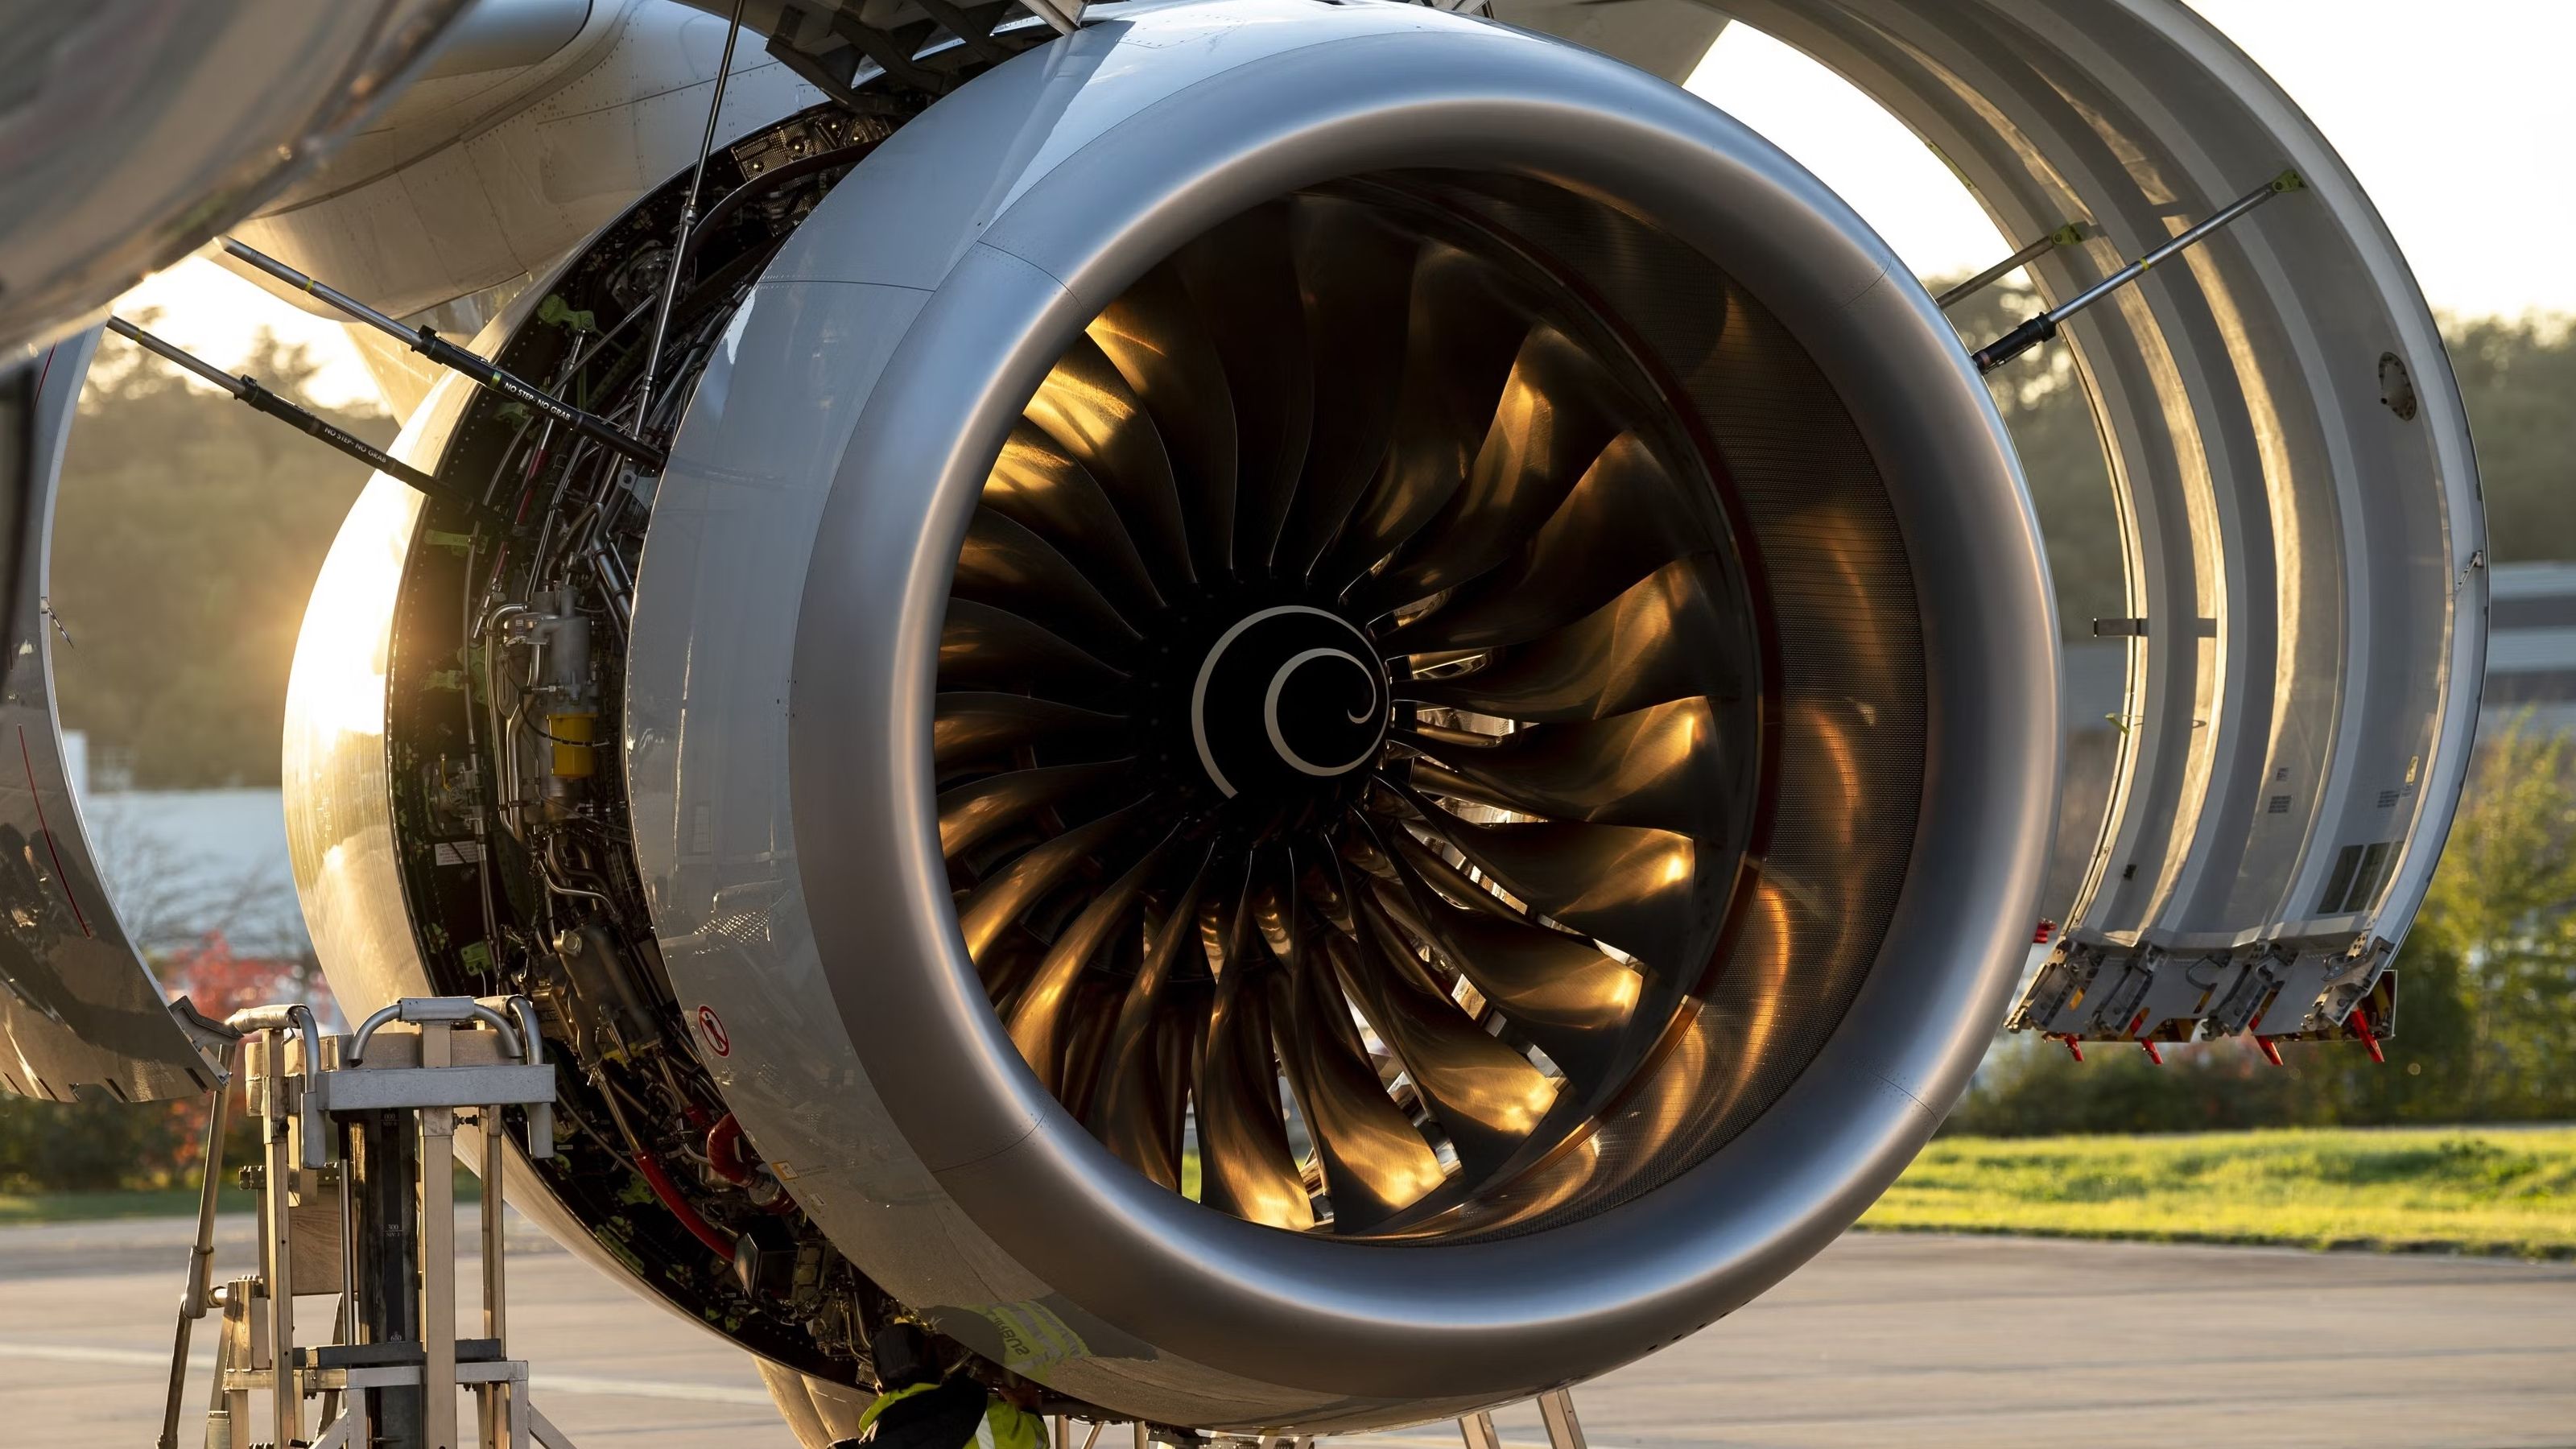 How much does 1 A380 engine cost?